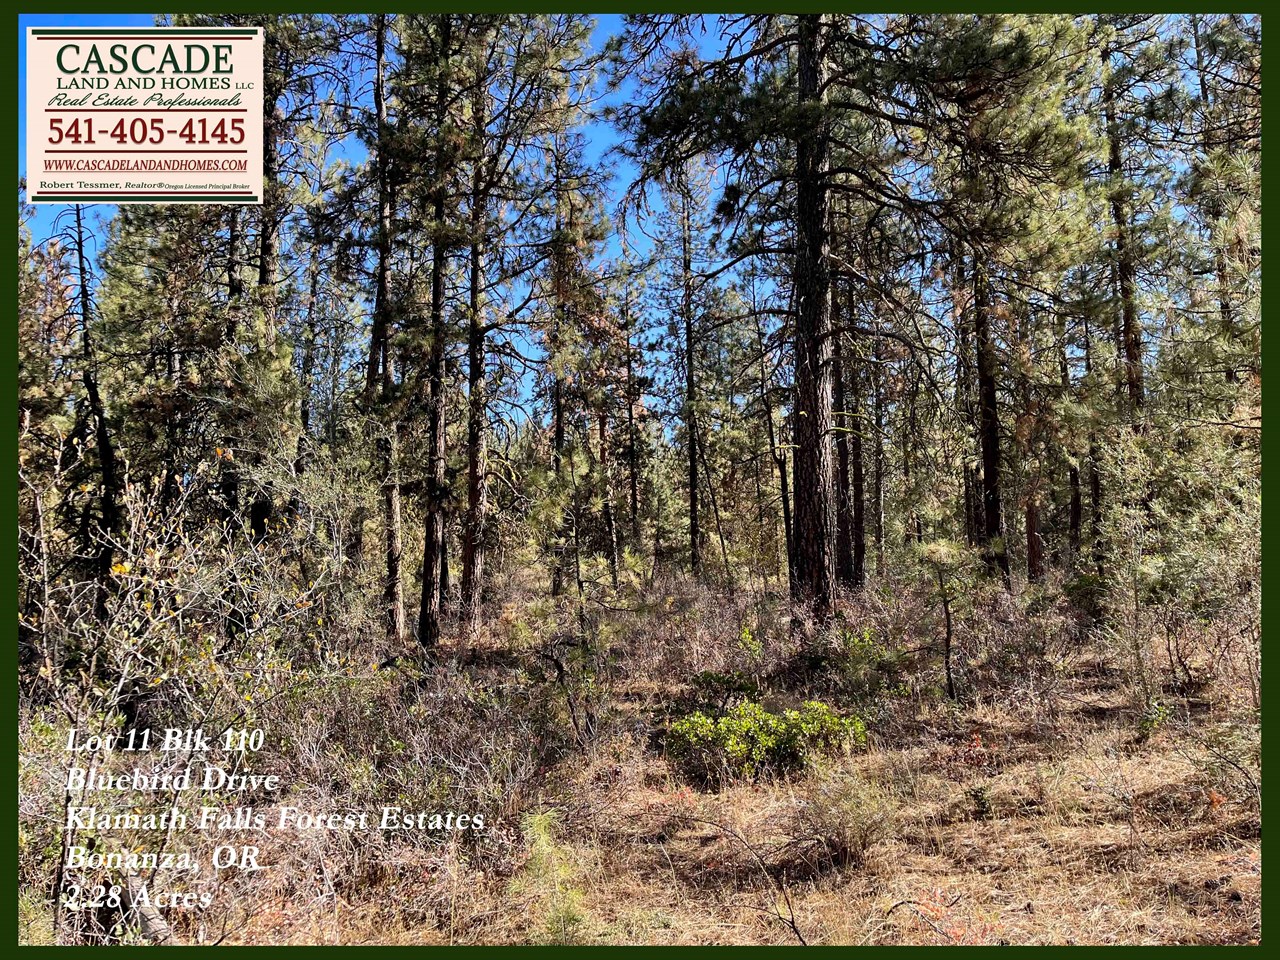 the property is heavily treed and covered with shrubs including sage and manzanita and native grasses. the soil here is volcanic loam with a layer of mulch from the pine needles under the tree canopy.